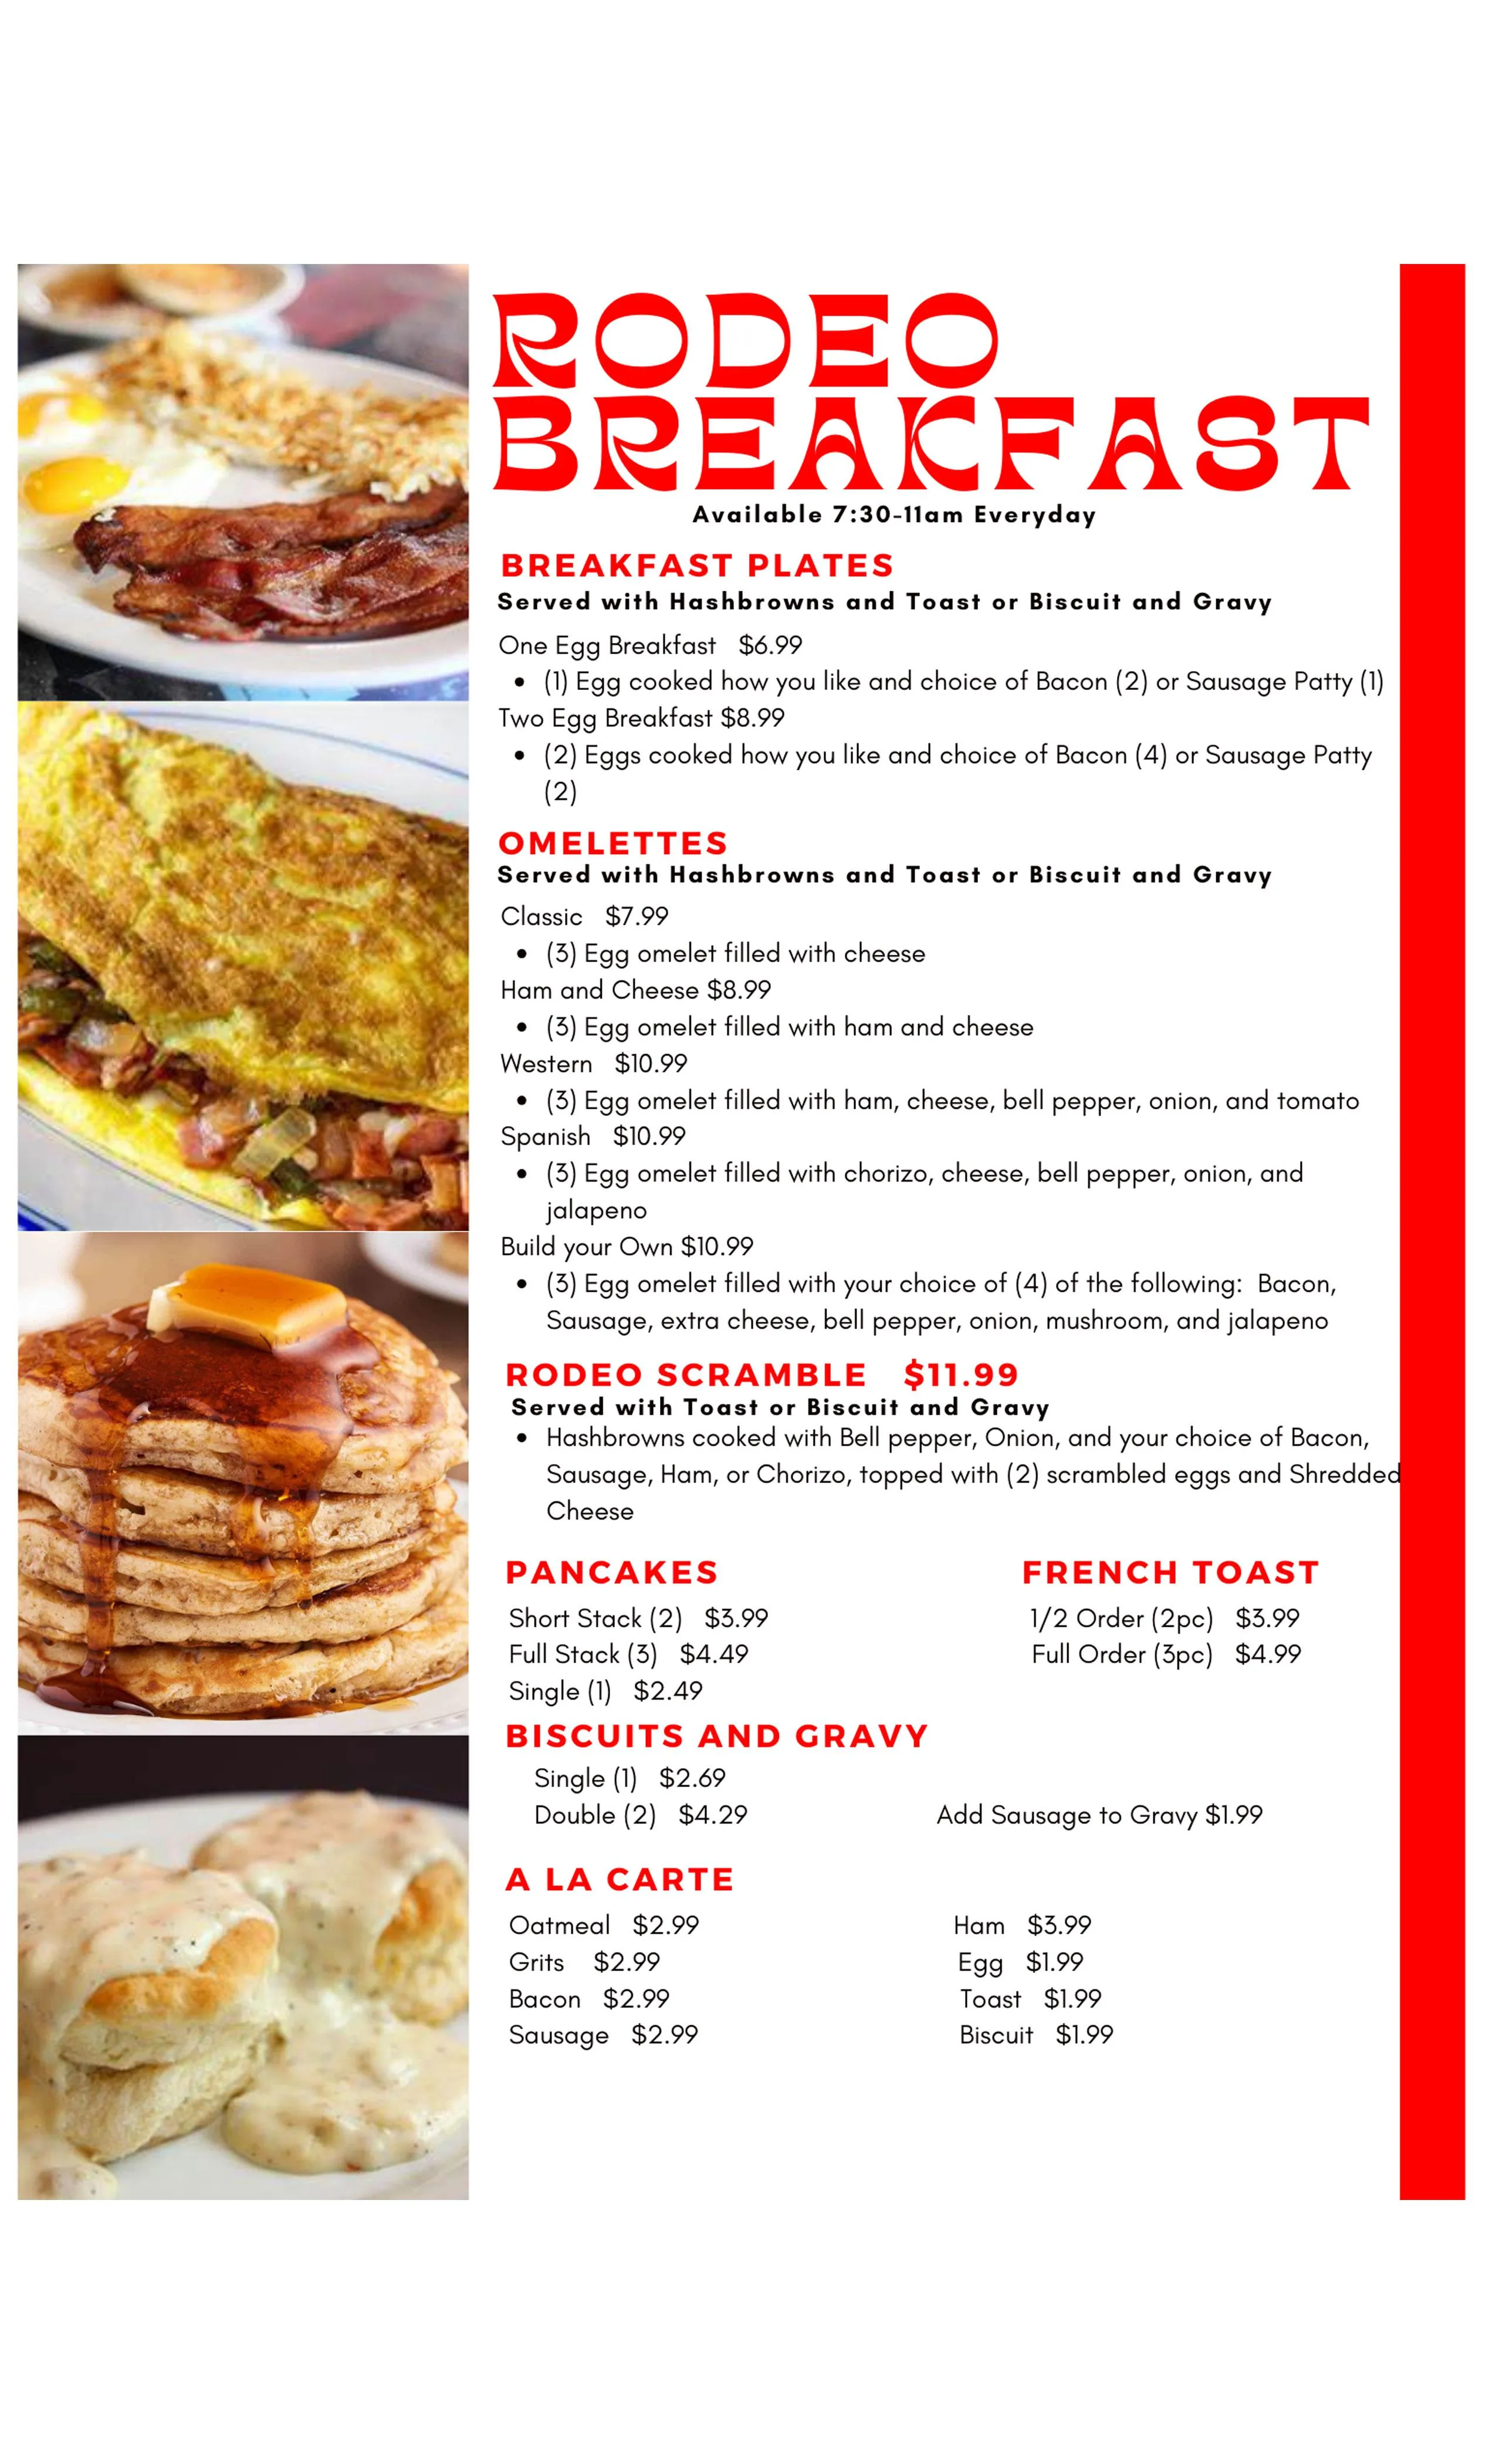 The Rodeo in Okmulgee breakfast menu page